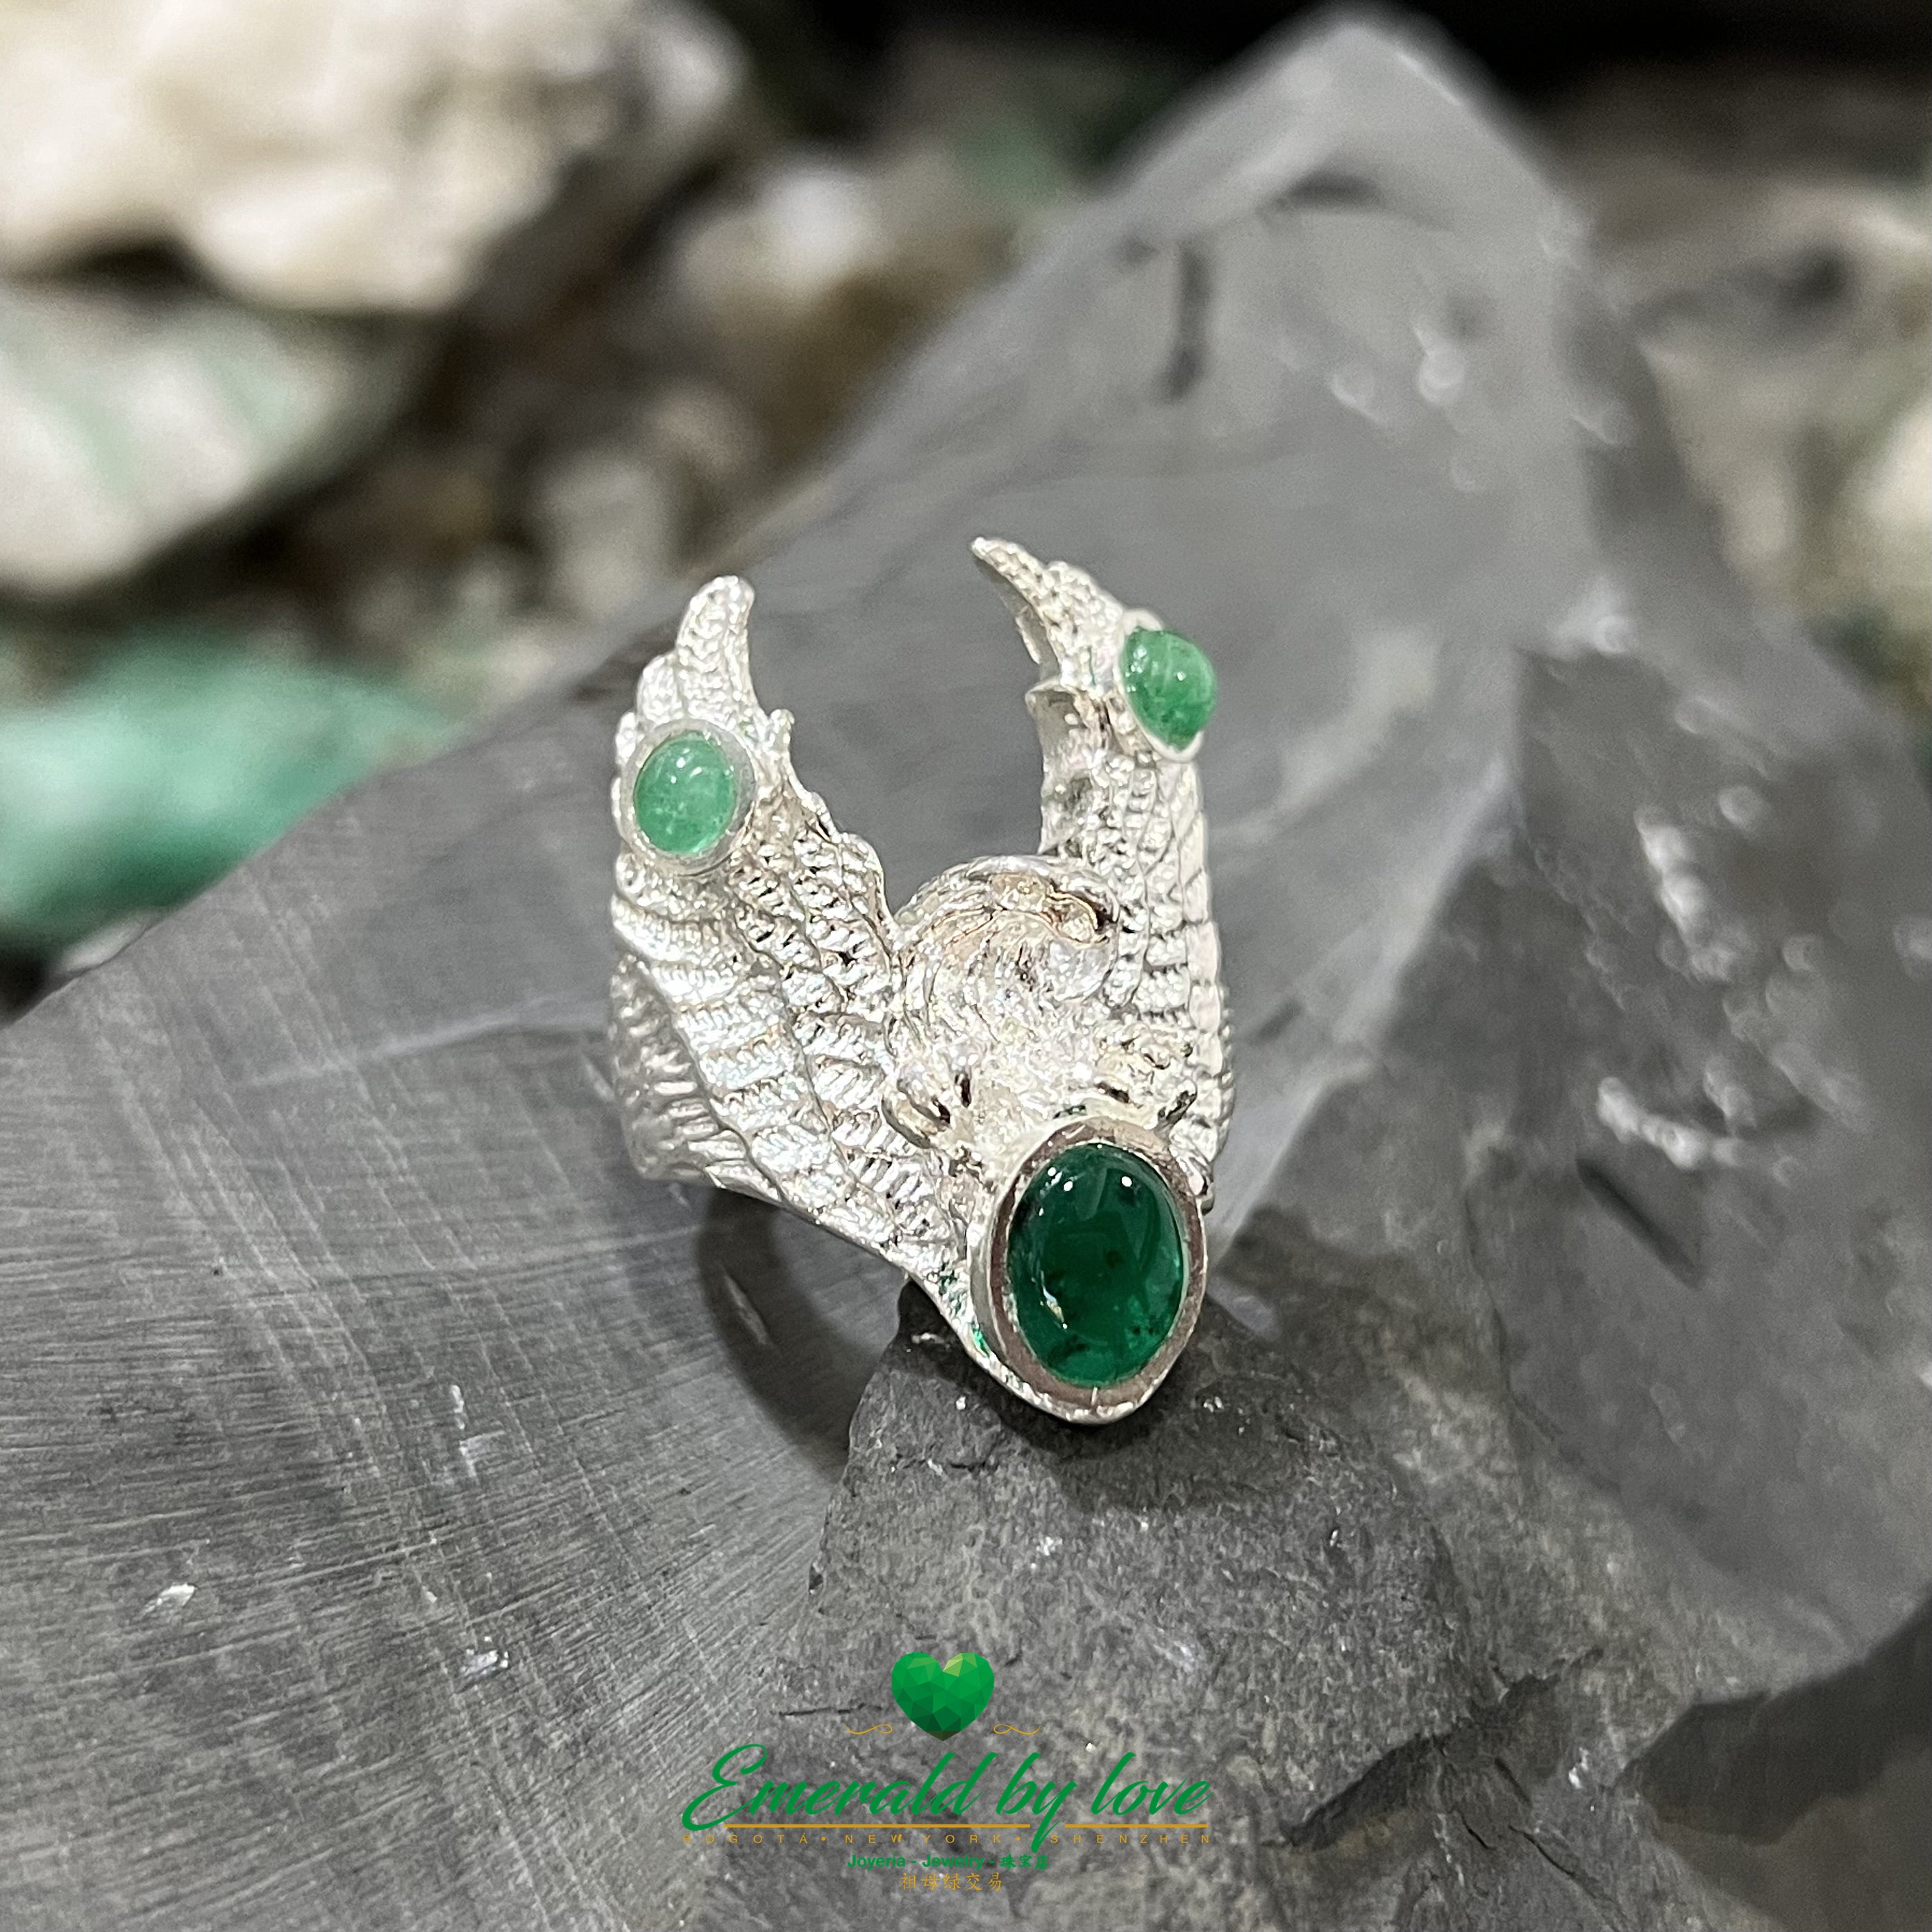 Eagle-Shaped Men's Ring with Cabochon Emerald